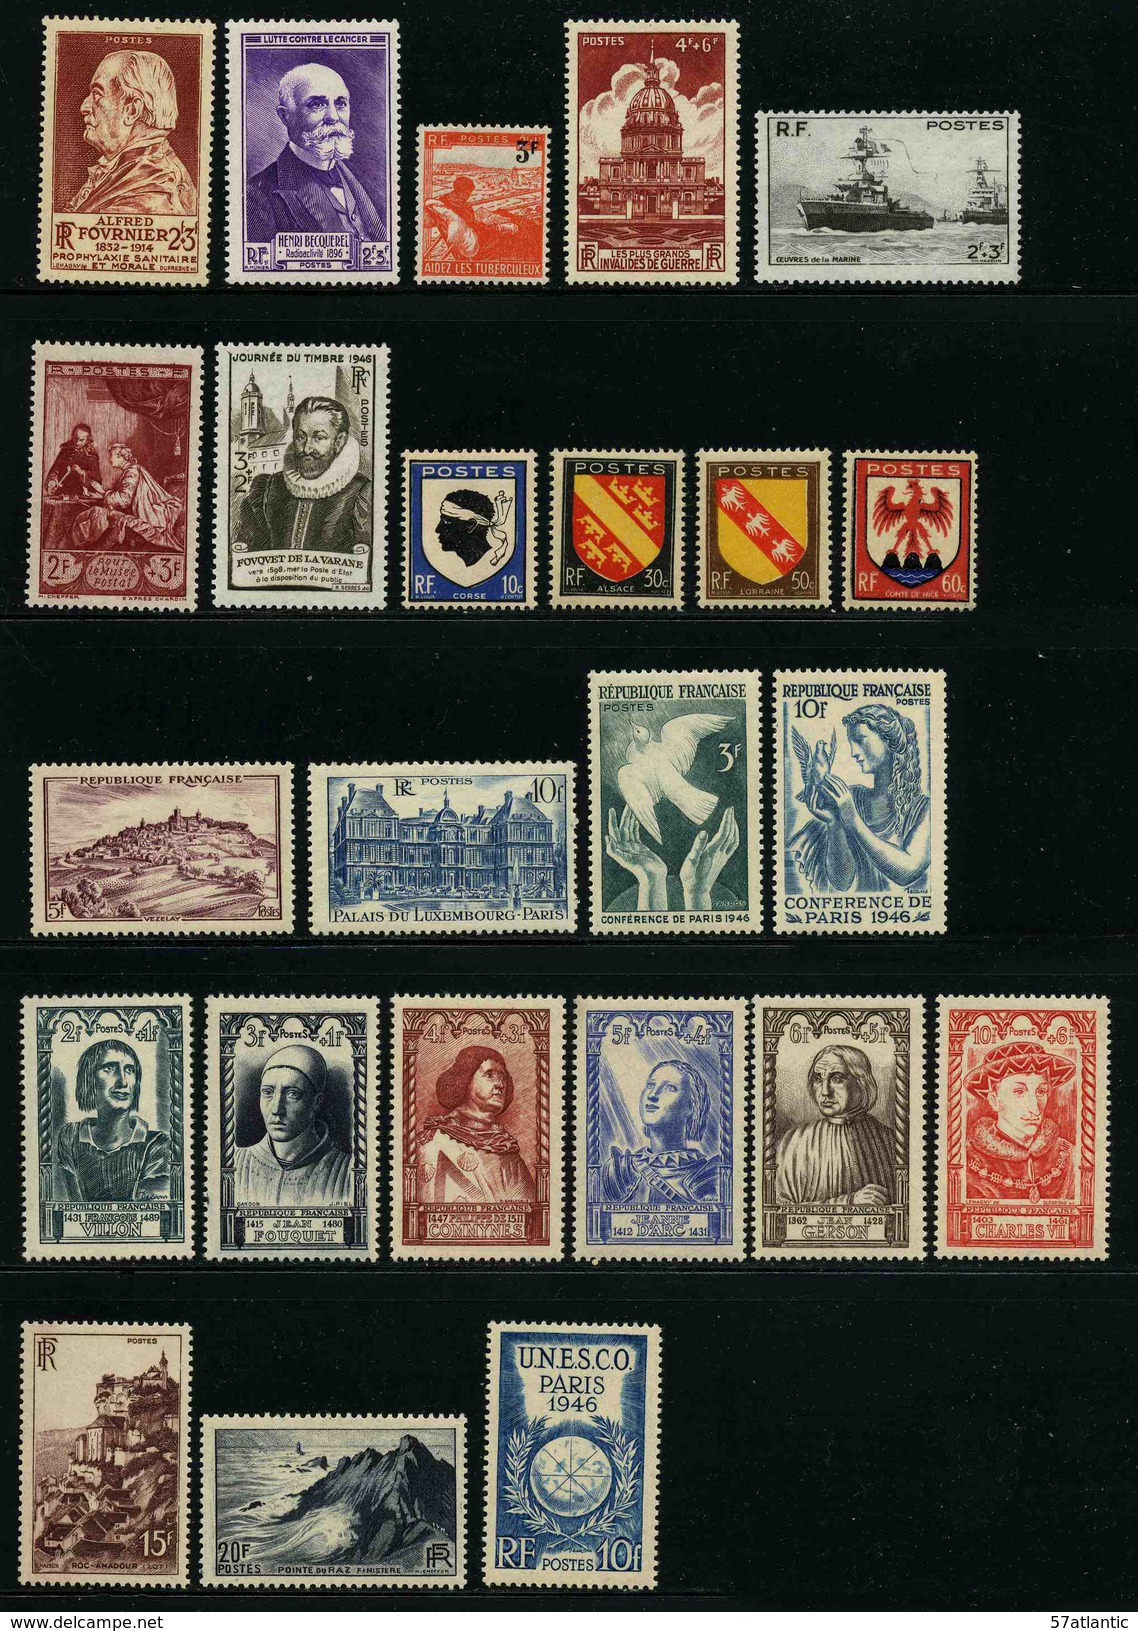 FRANCE - ANNEE COMPLETE 1946 - YT 748 à 771 ** - 24 TIMBRES NEUFS ** - 1940-1949